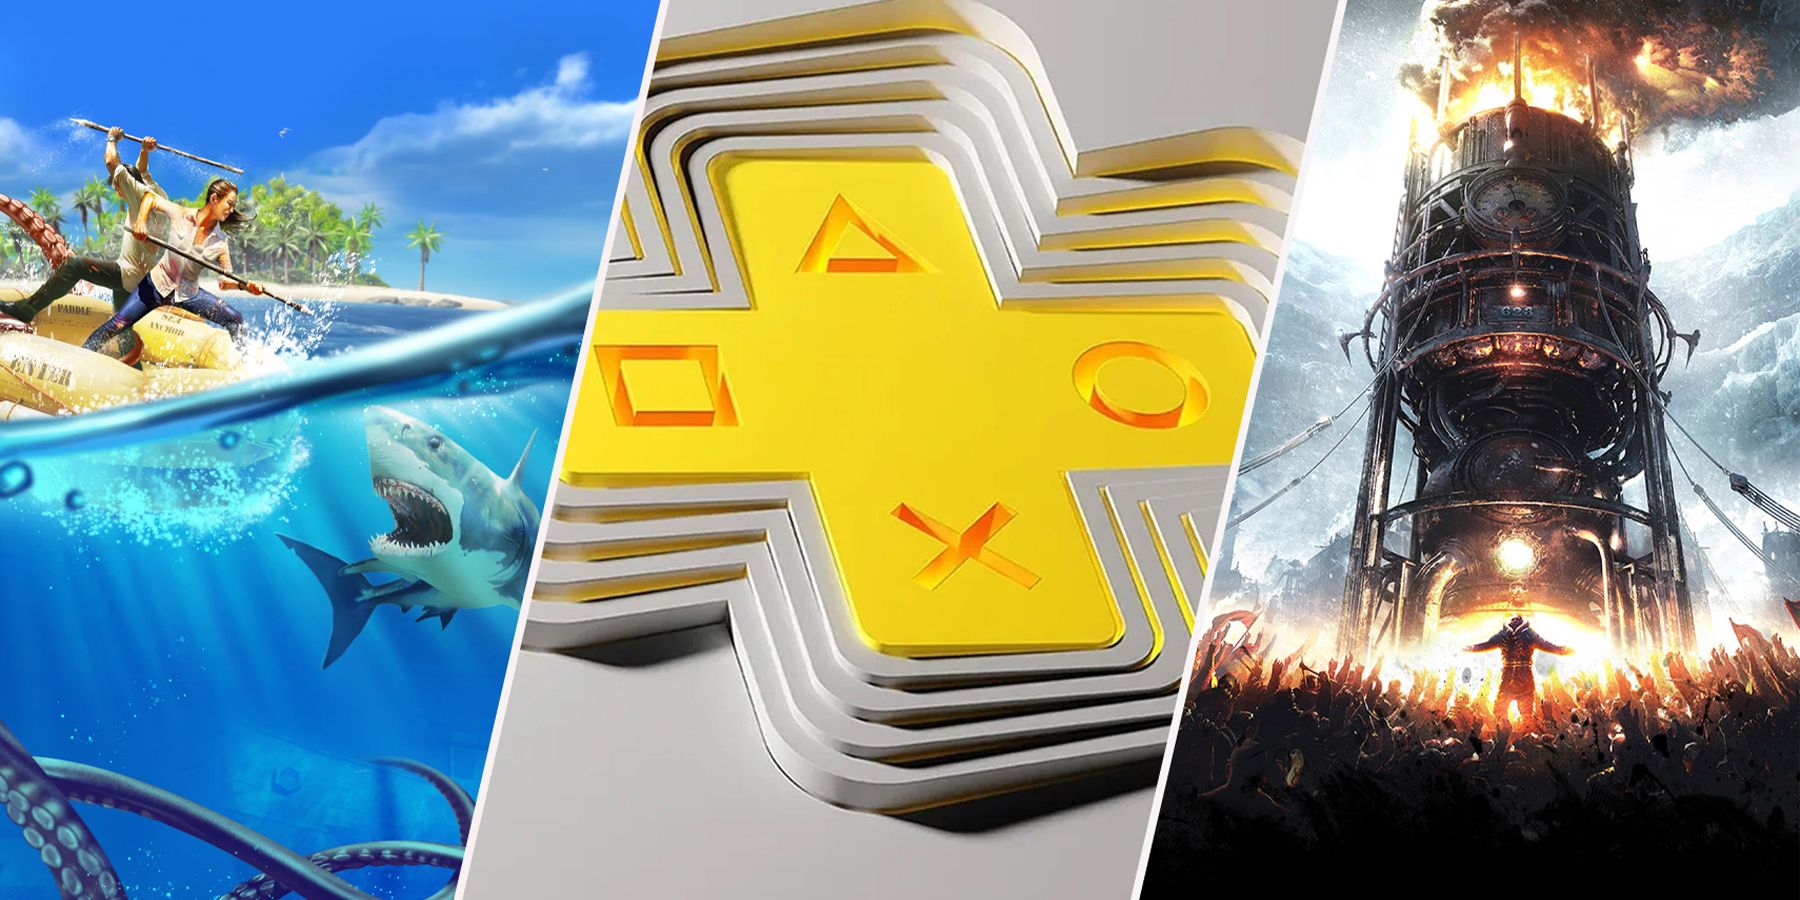 Free PlayStation Plus games for November 2014